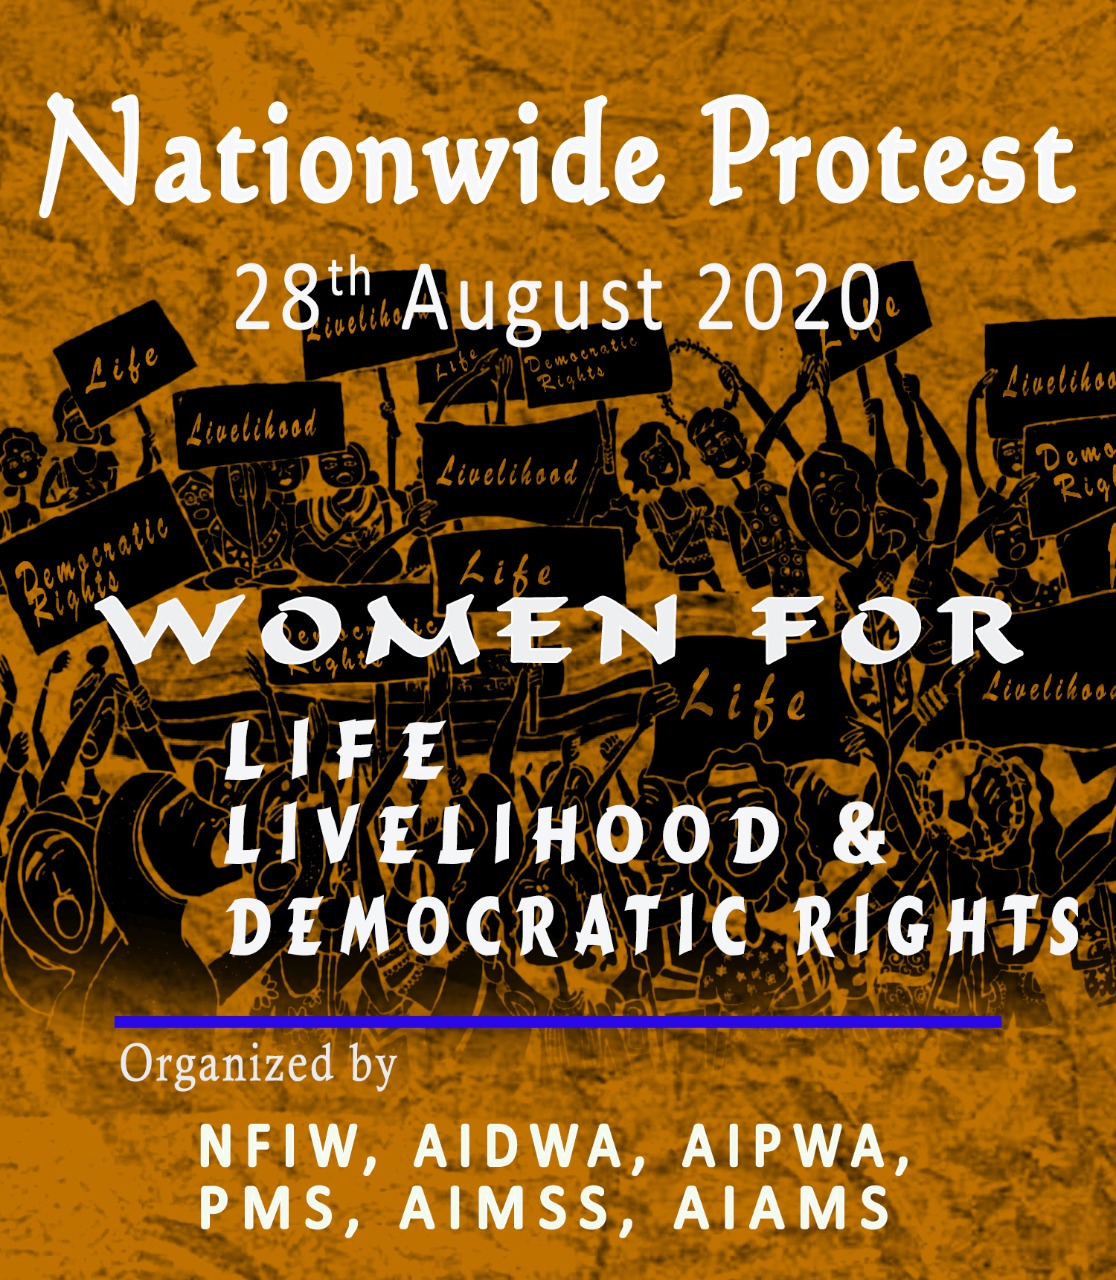 WOMEN FOR LIFE, LIVELIHOOD& DEMOCRATIC RIGHTS Call for Nationwide Proteston 28th August 2020